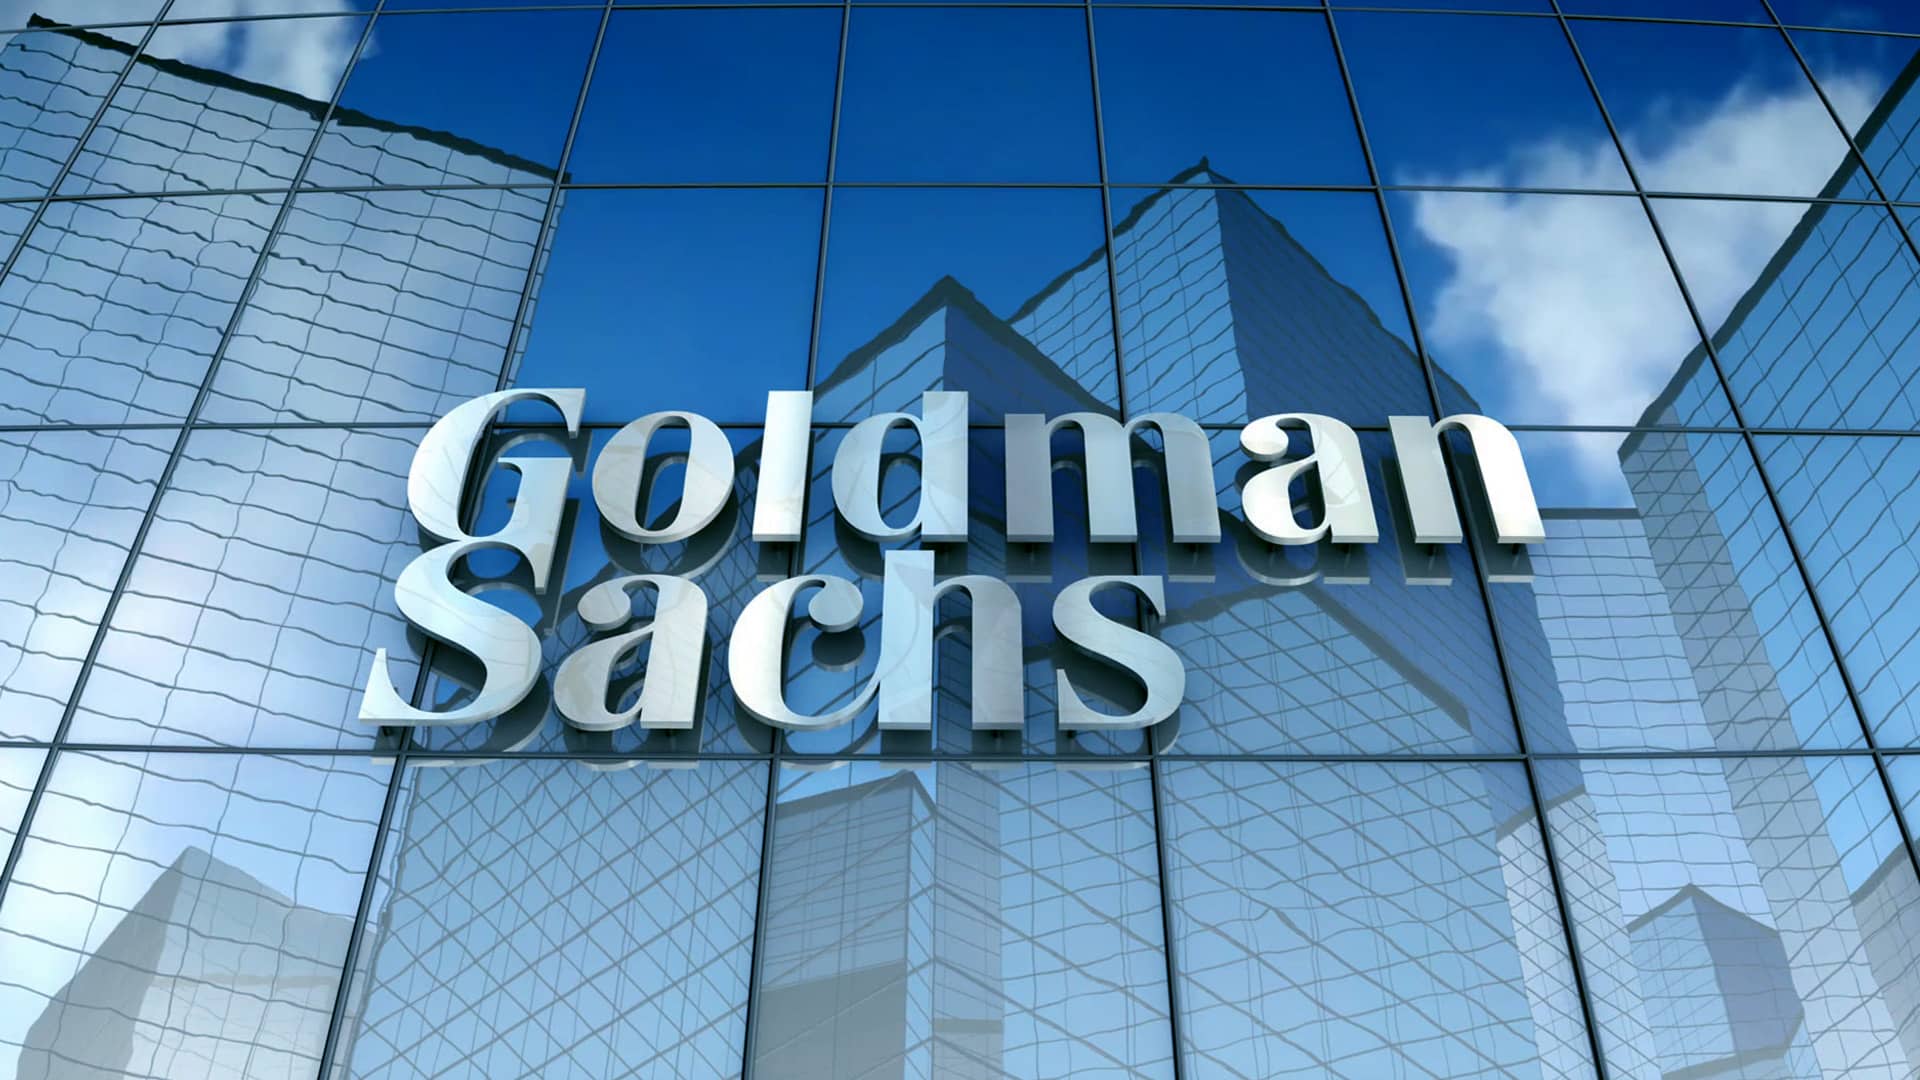 Goldman Sachs commits addl USD 10 mn to support COVID relief efforts in India